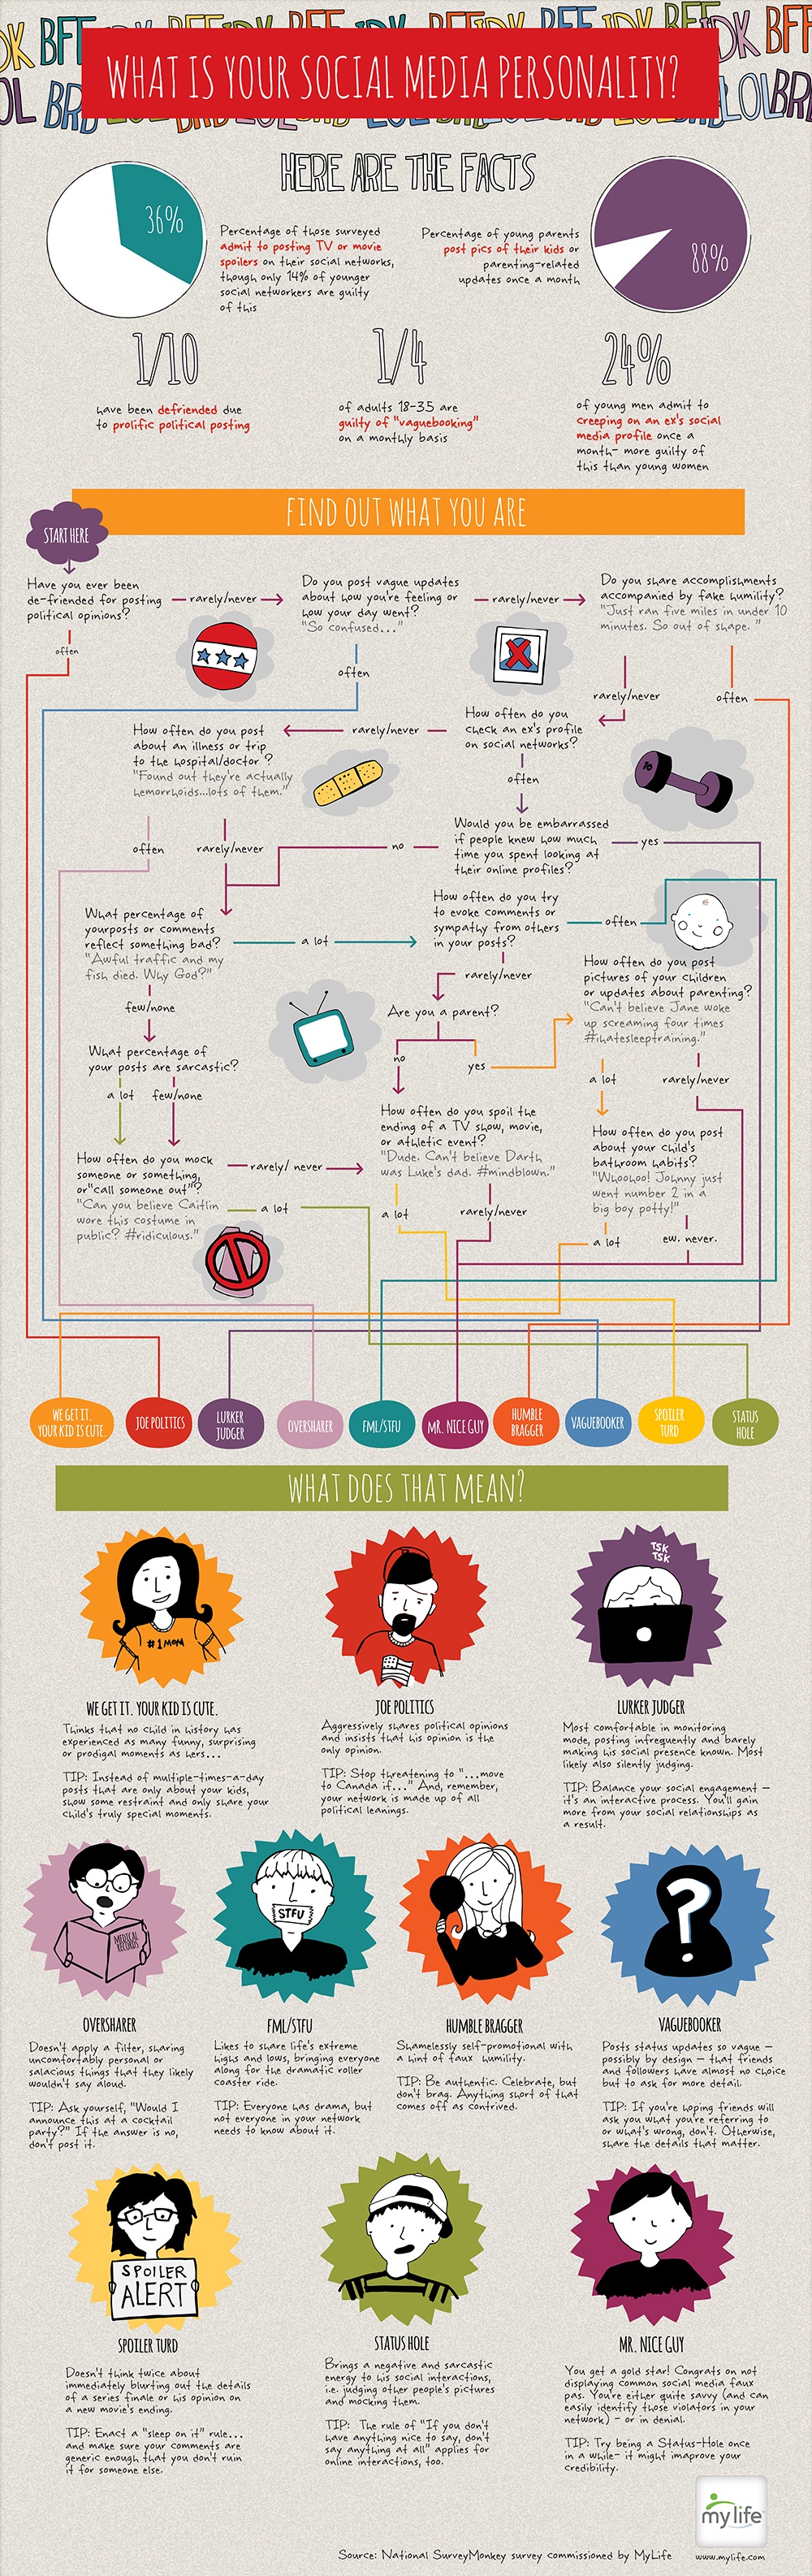 The social network persona infographic